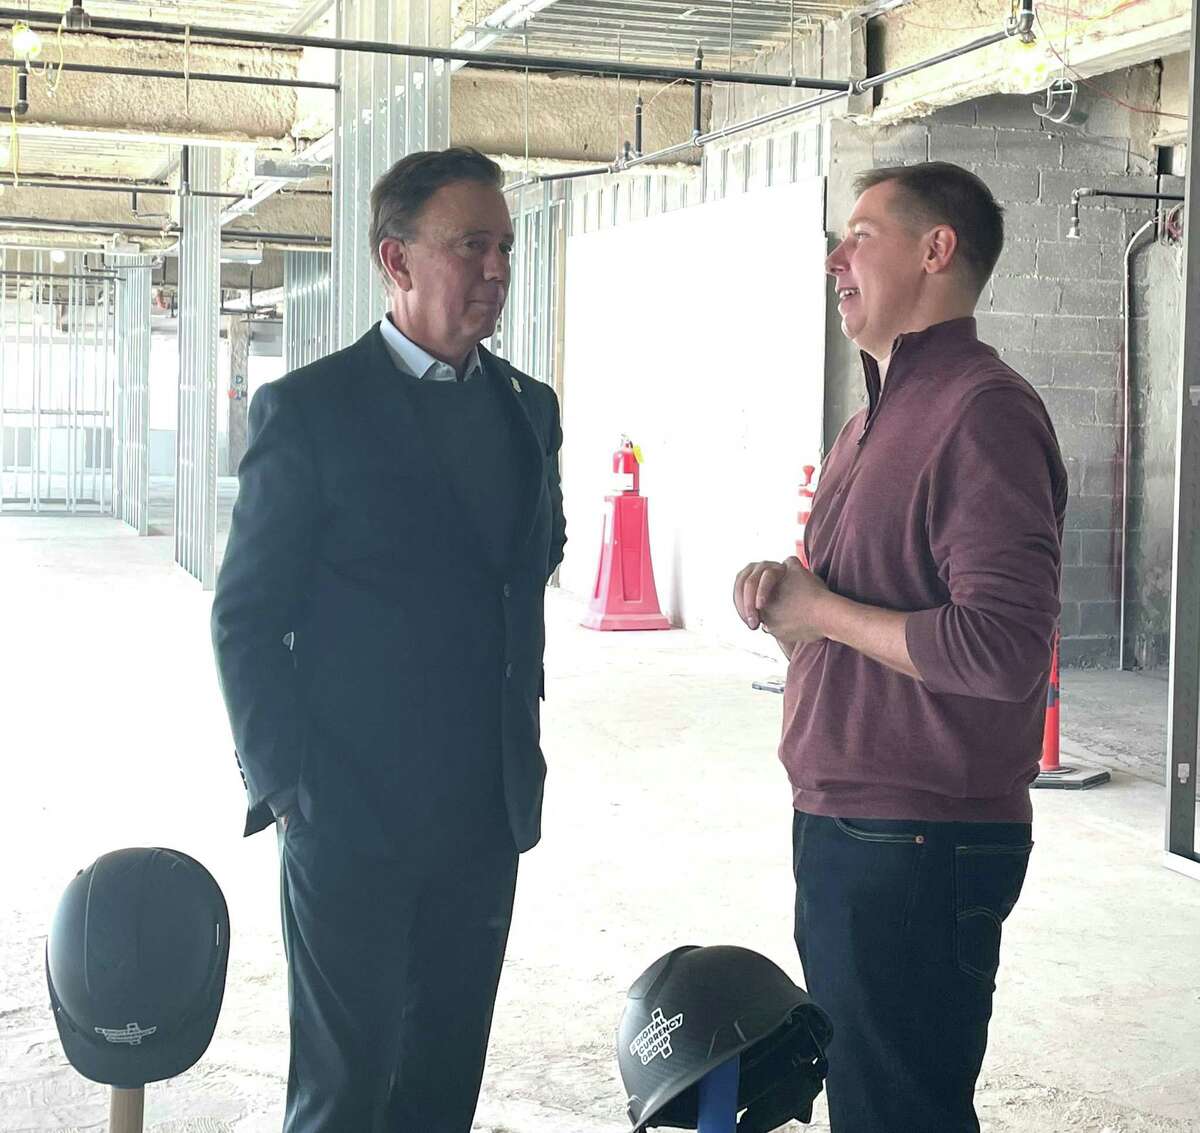 Gov. Ned Lamont, left, and Digital Currency Group founder and CEO Barry Silbert talk on Monday, Nov. 29, 2021 at the future DCG headquarters at 290 Harbor Drive in Stamford, Conn.